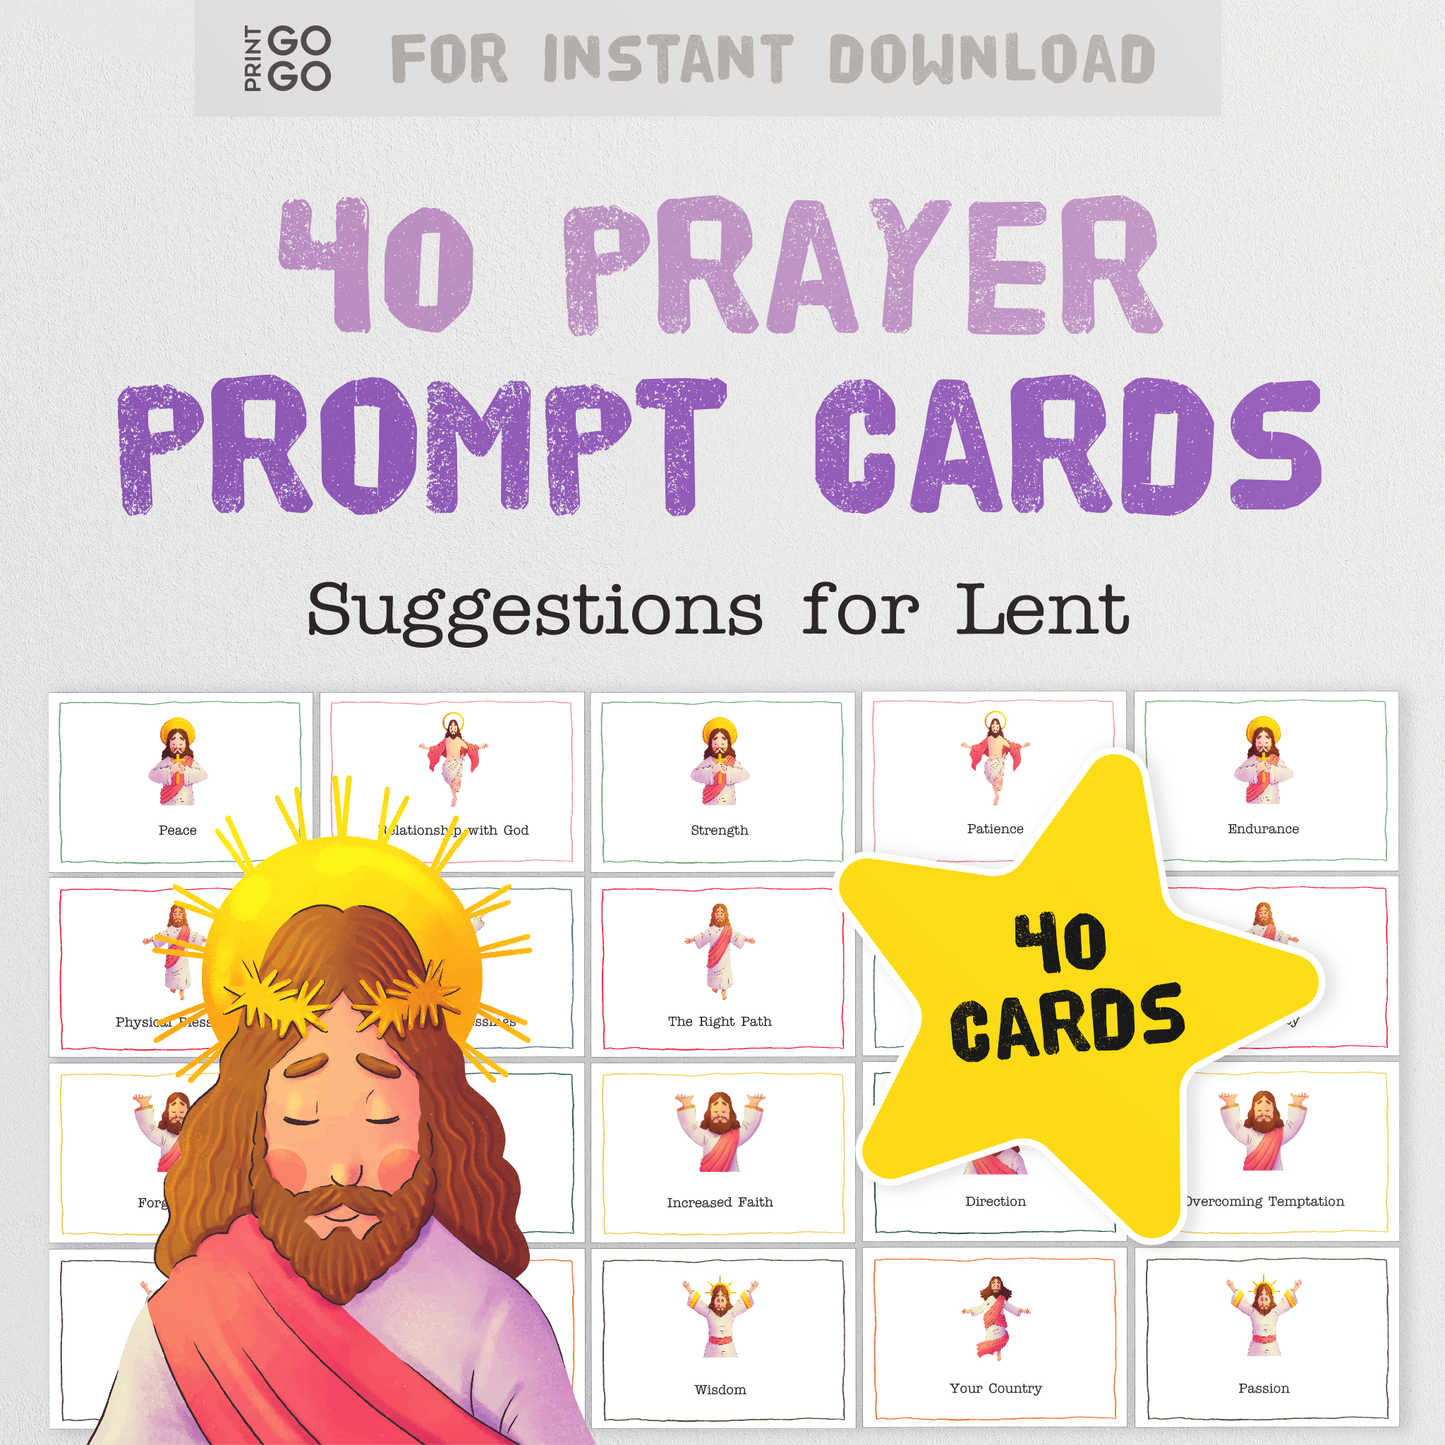 40 Prayer Prompt Cards for Children - Suggestions for Lent